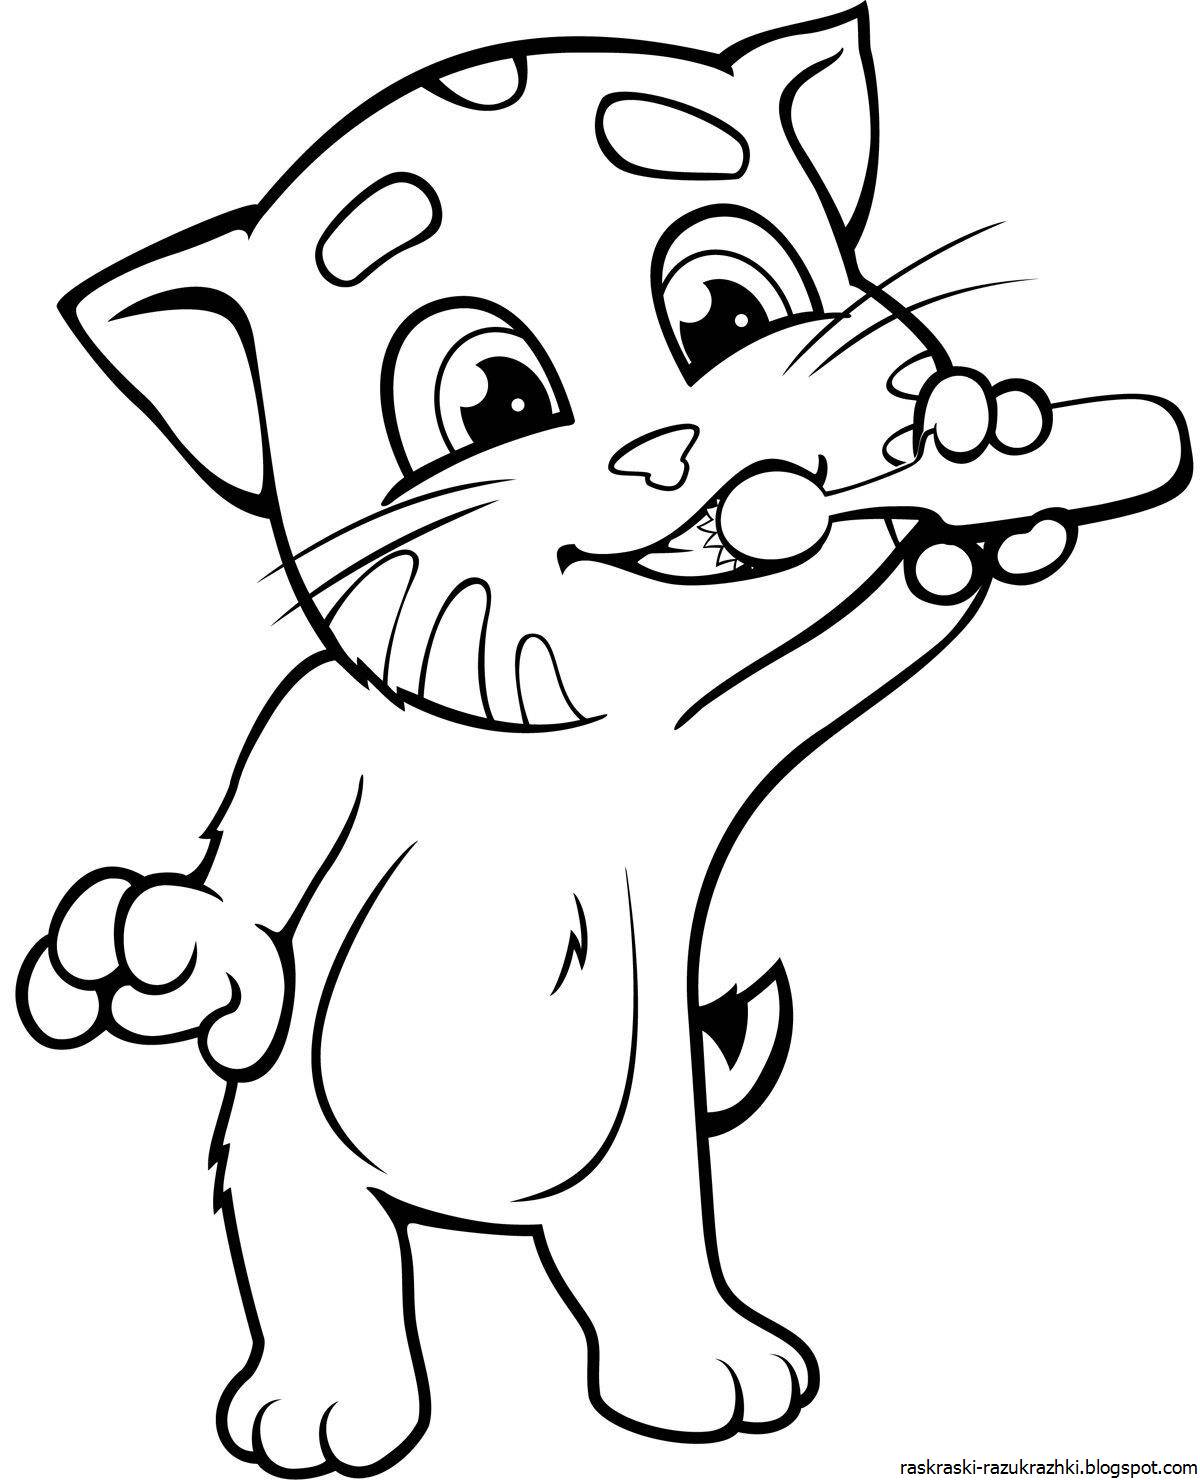 Playful cat coloring for kids